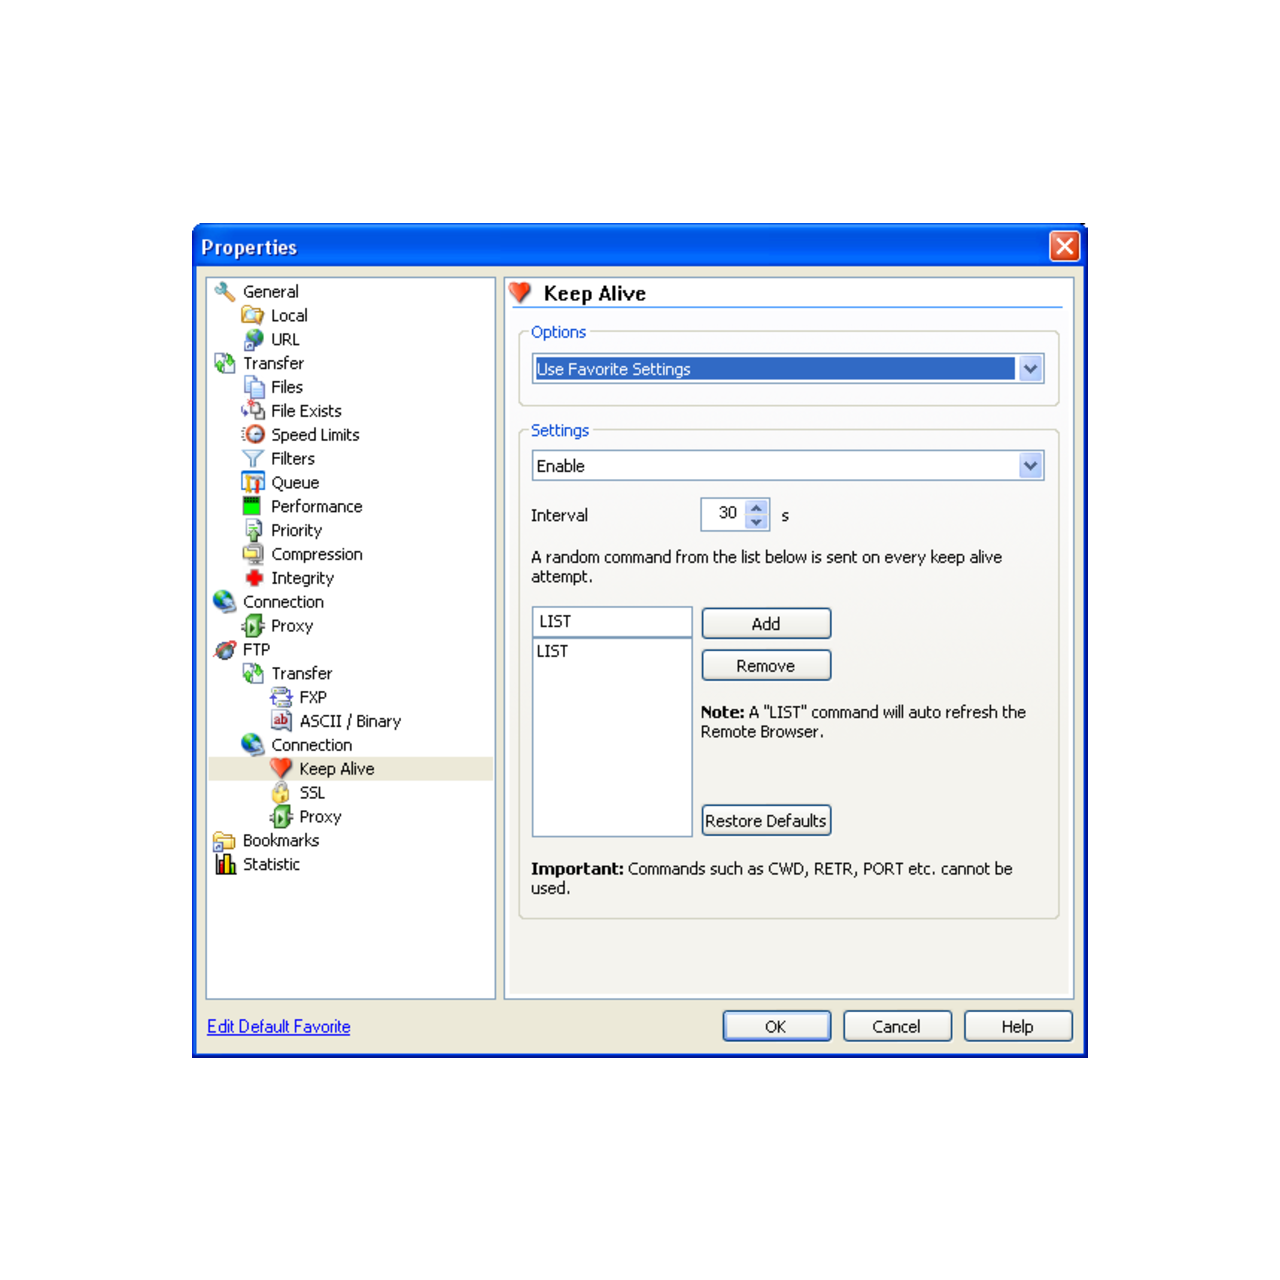 SmartFTP Client 10.0.3142 download the new version for ipod